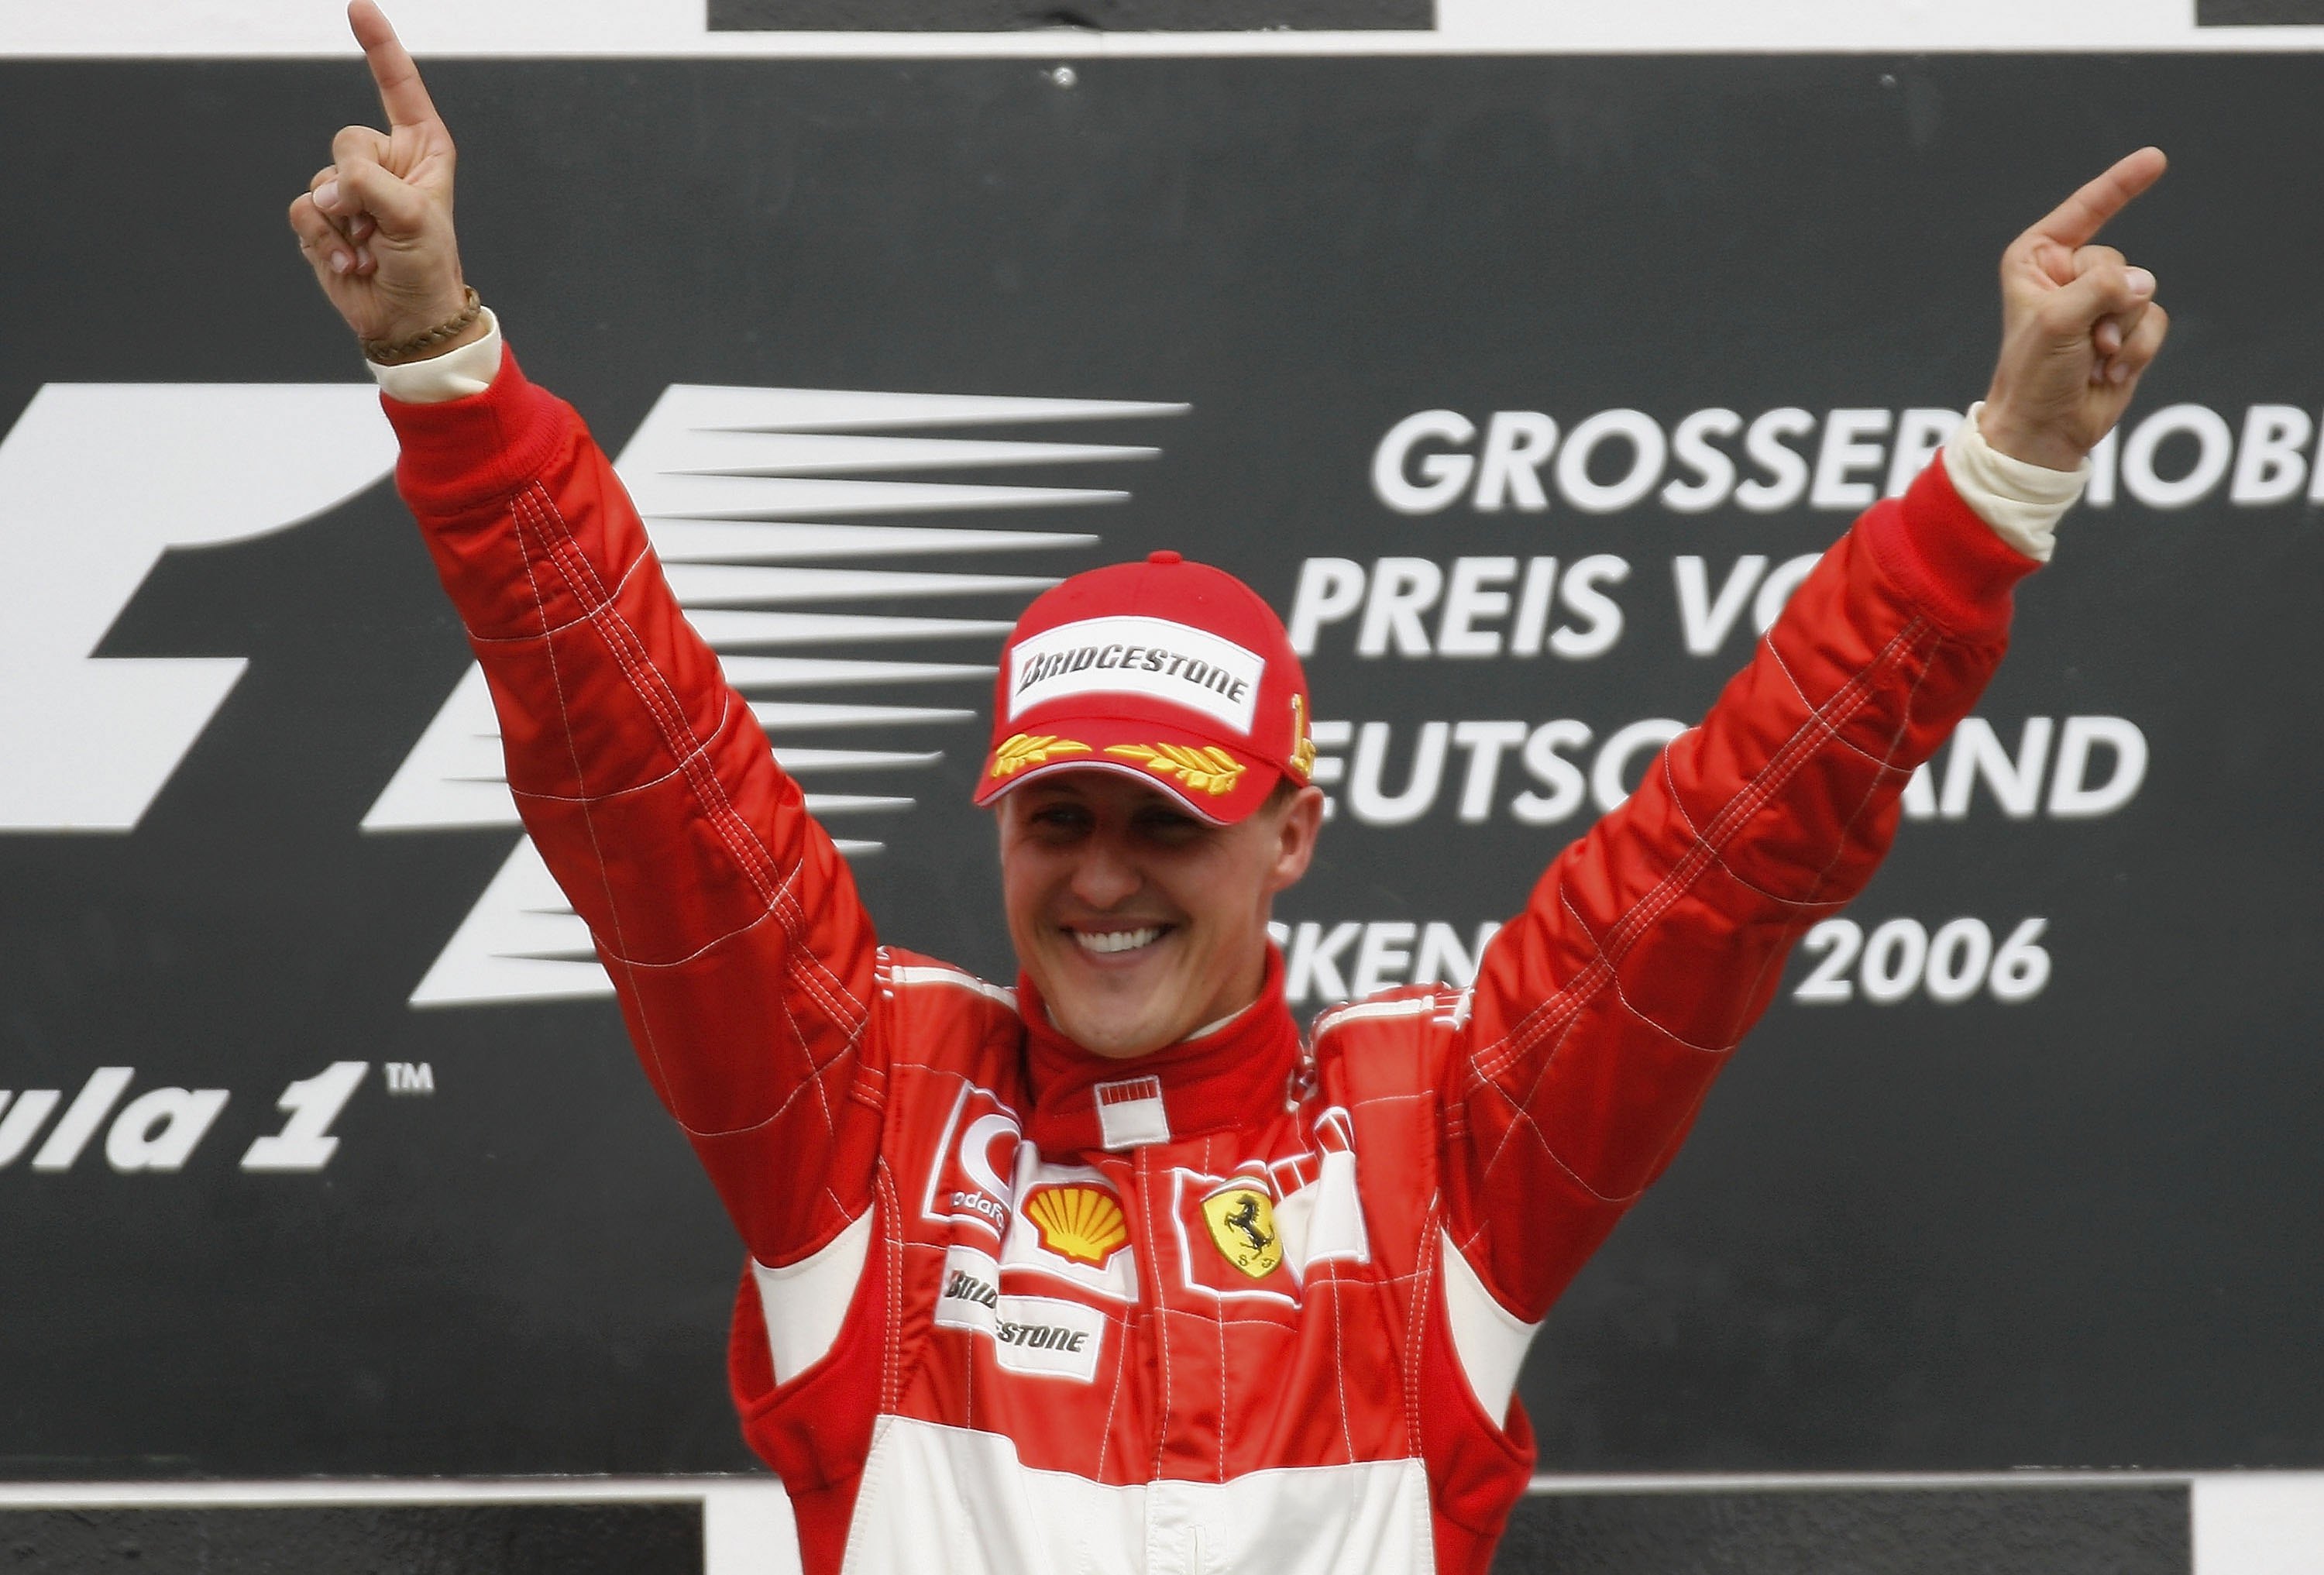 Michael schumacher is one of the greatest drivers ever to grace f1